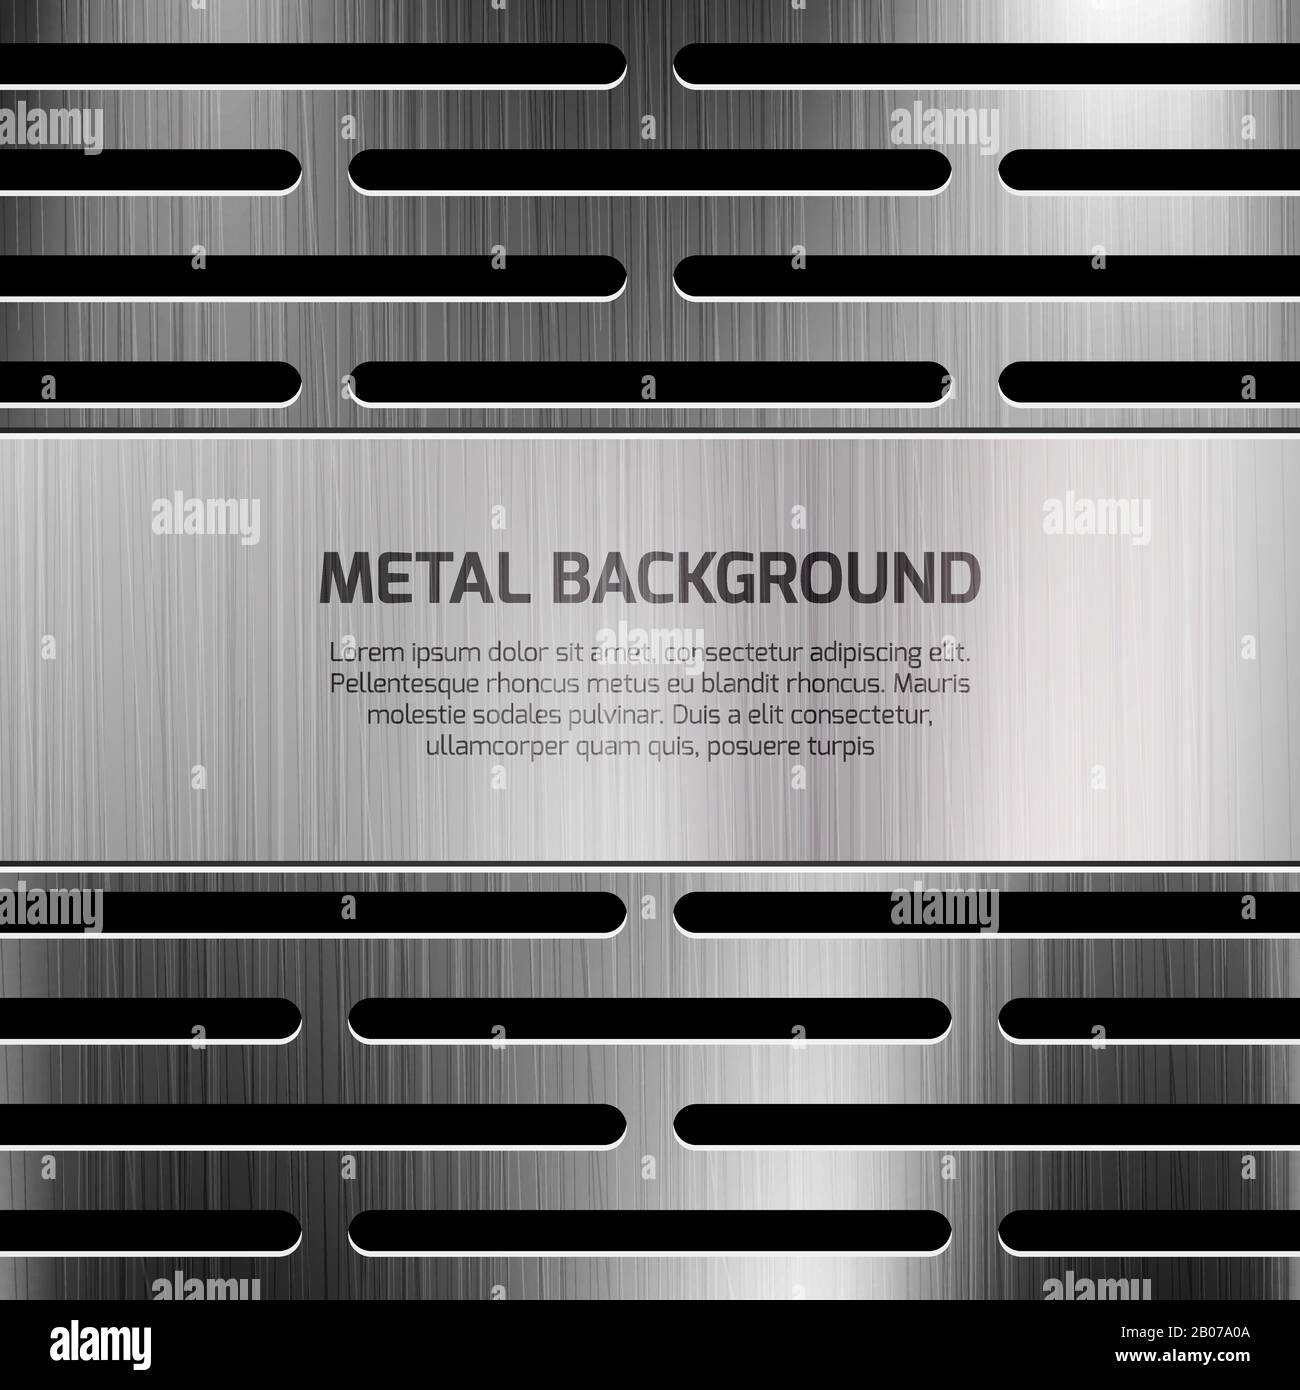 Abstract techno metal vector background. Template of poster with polished surface metallic illustration Stock Vector